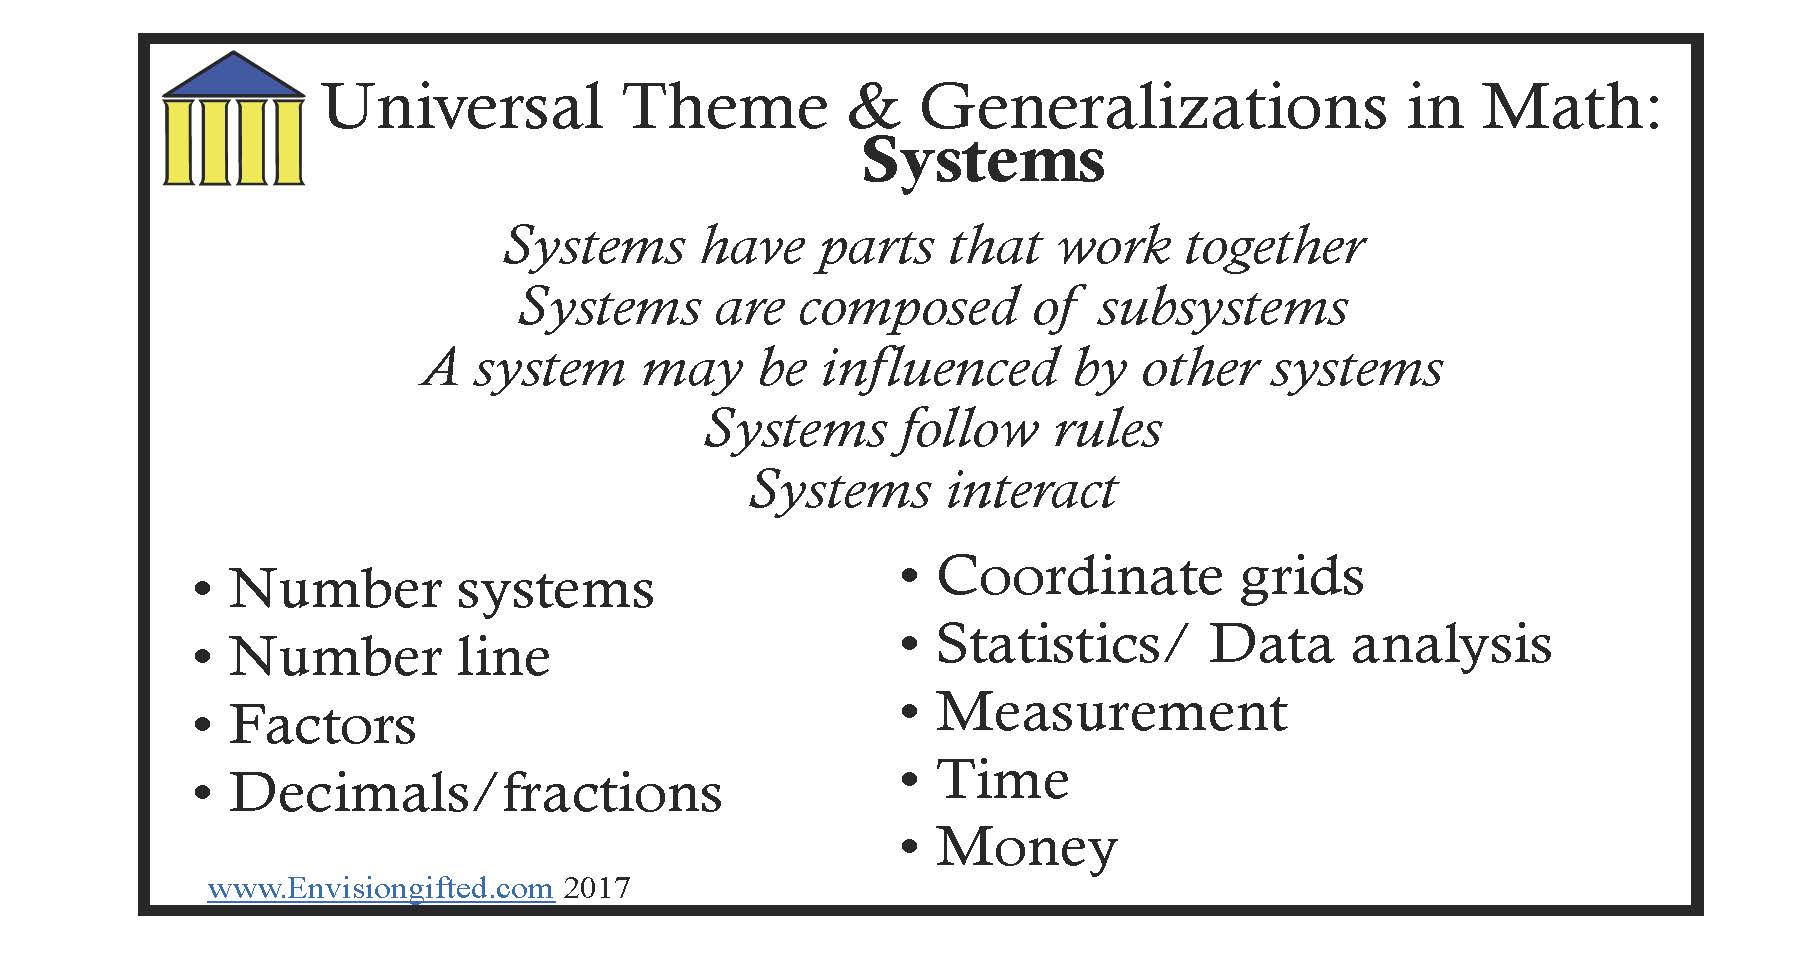 Envision Gifted. Universal Theme Systems Math